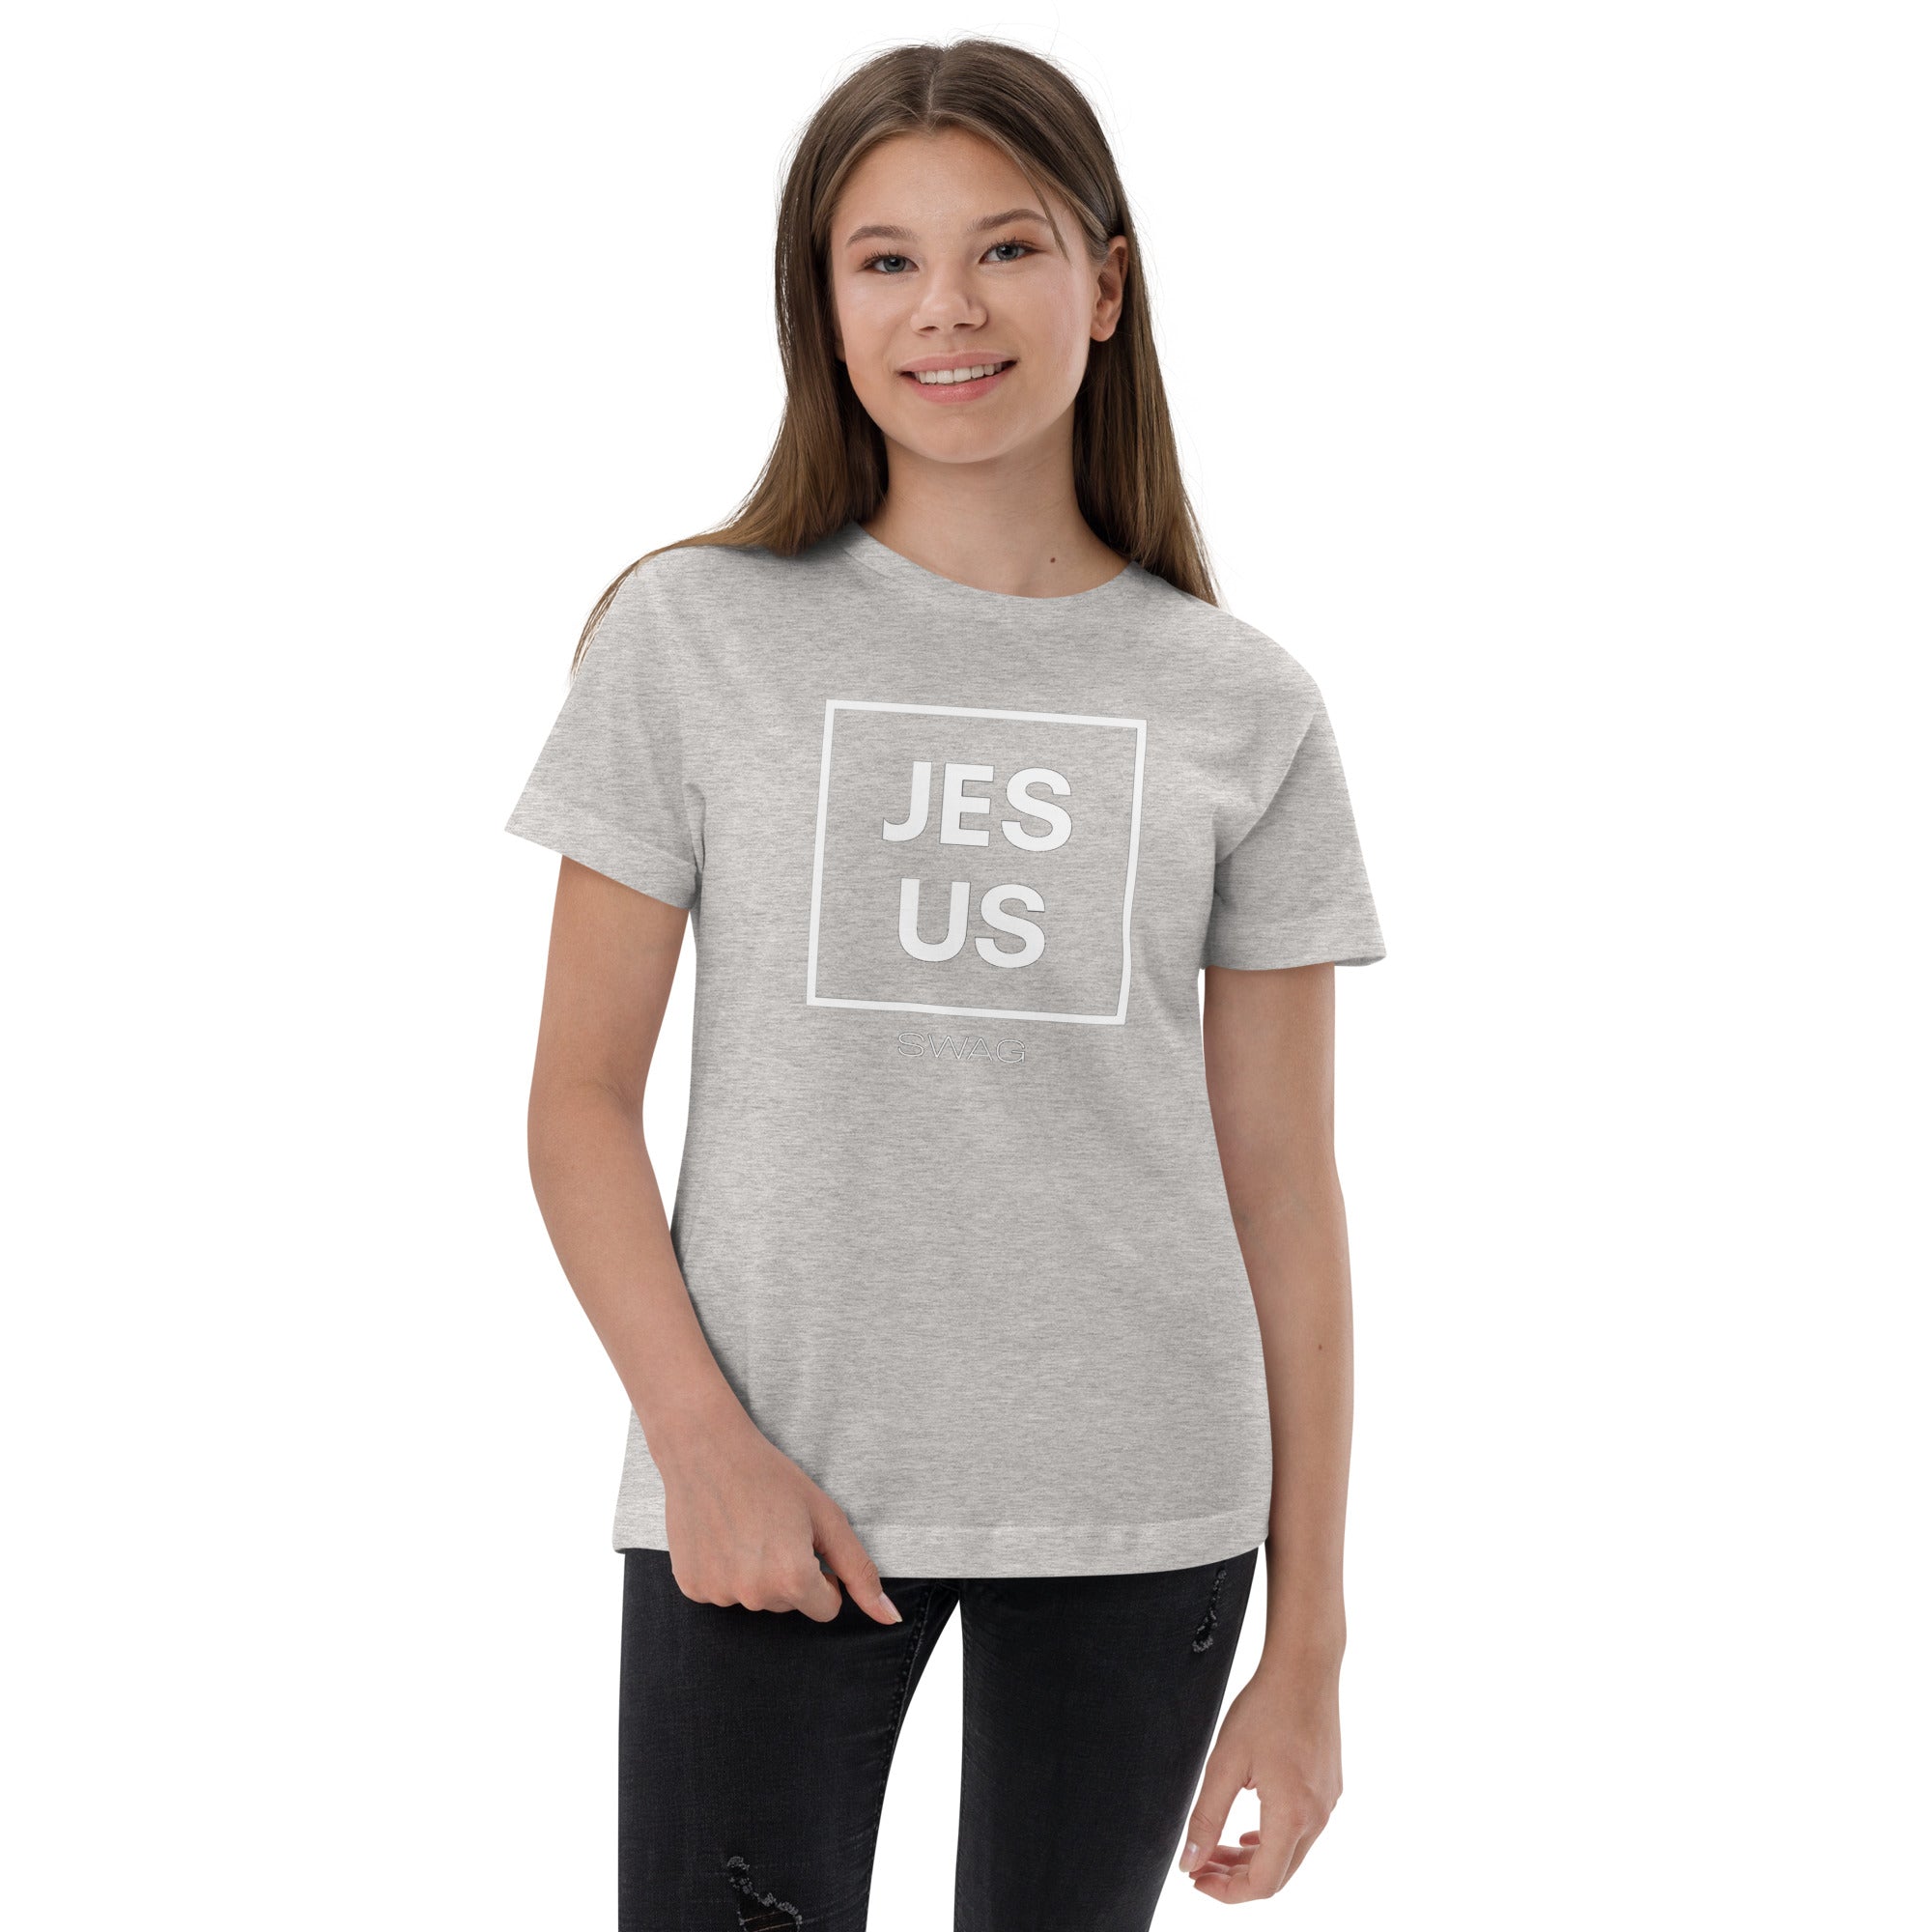 Jes-Us Swag Youth jersey t-shirt